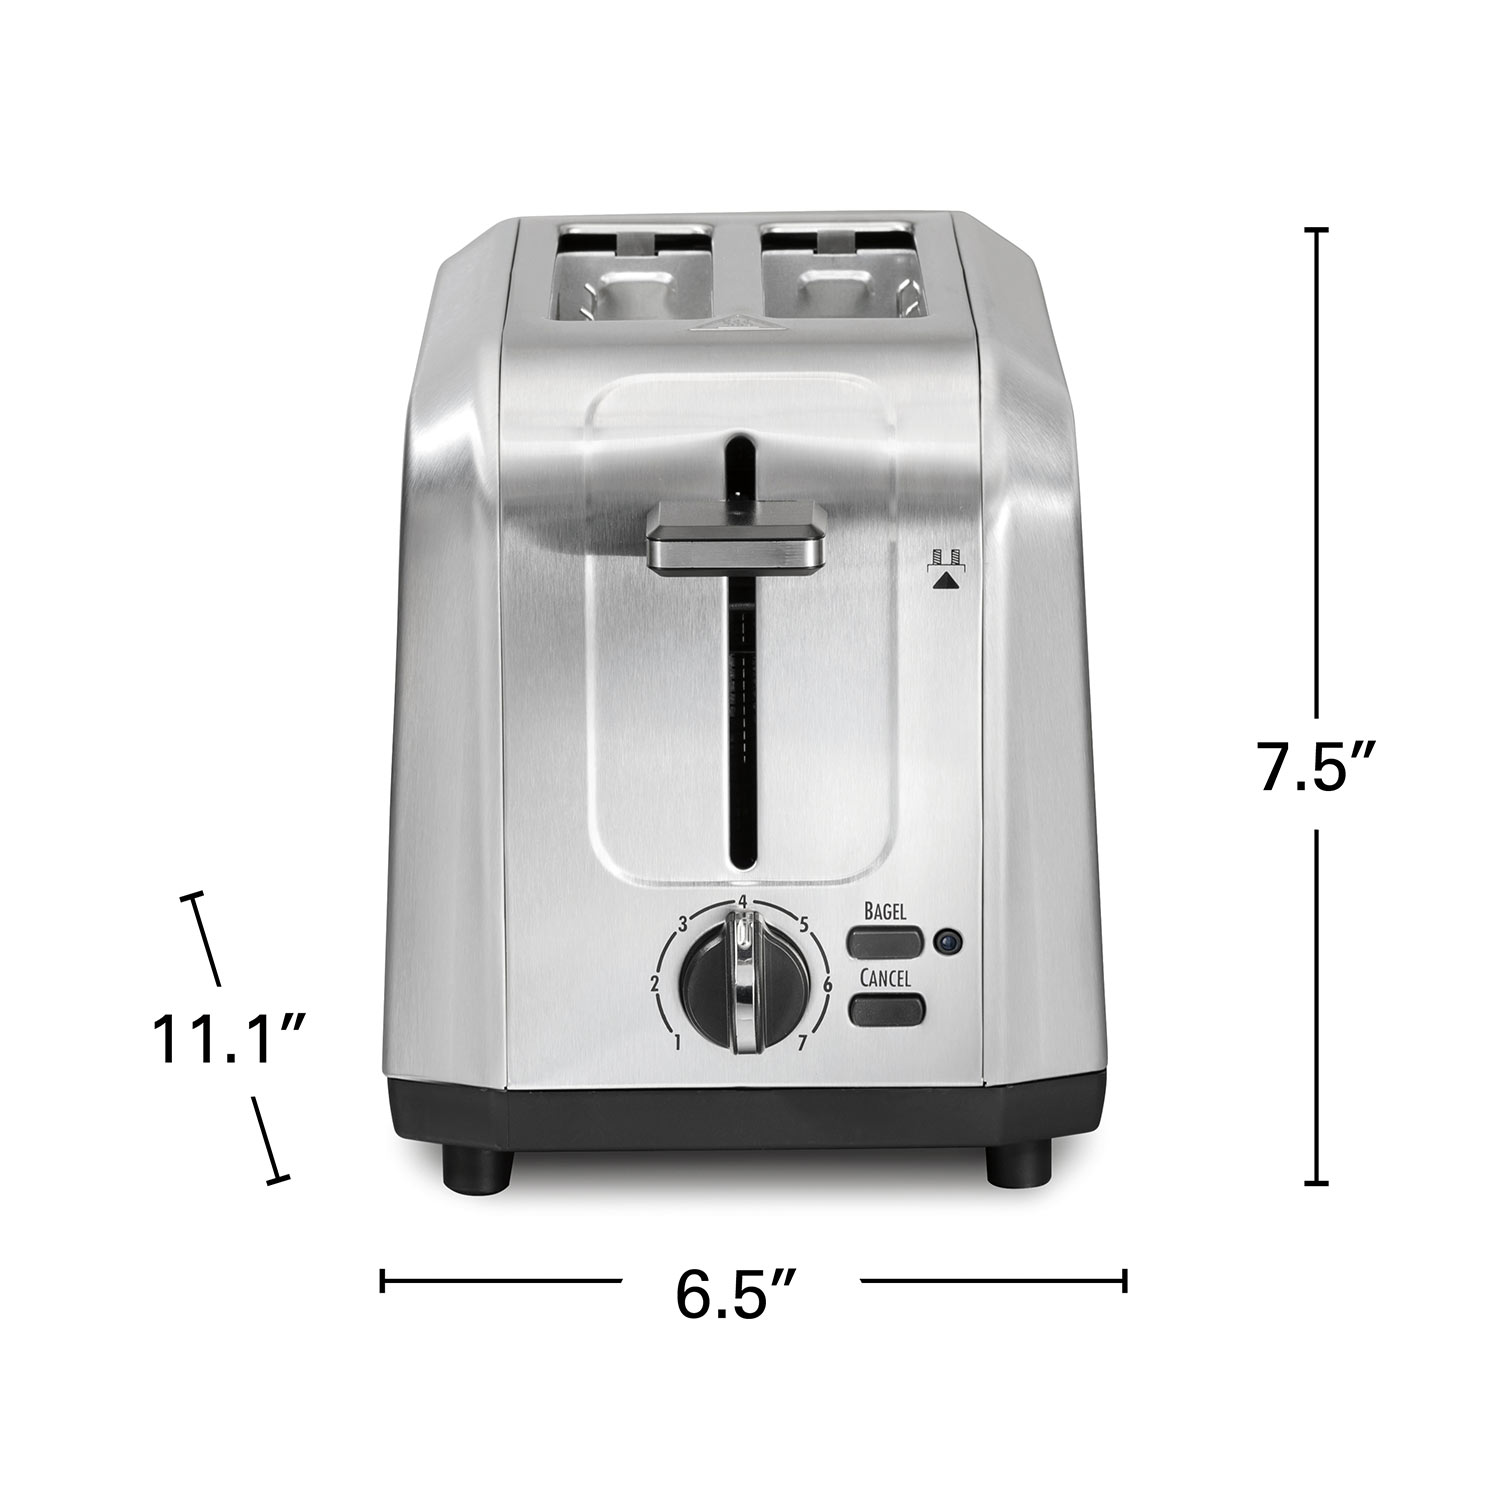 Hamilton Beach 4 Slice Toaster with Extra-Wide Slots Stainless